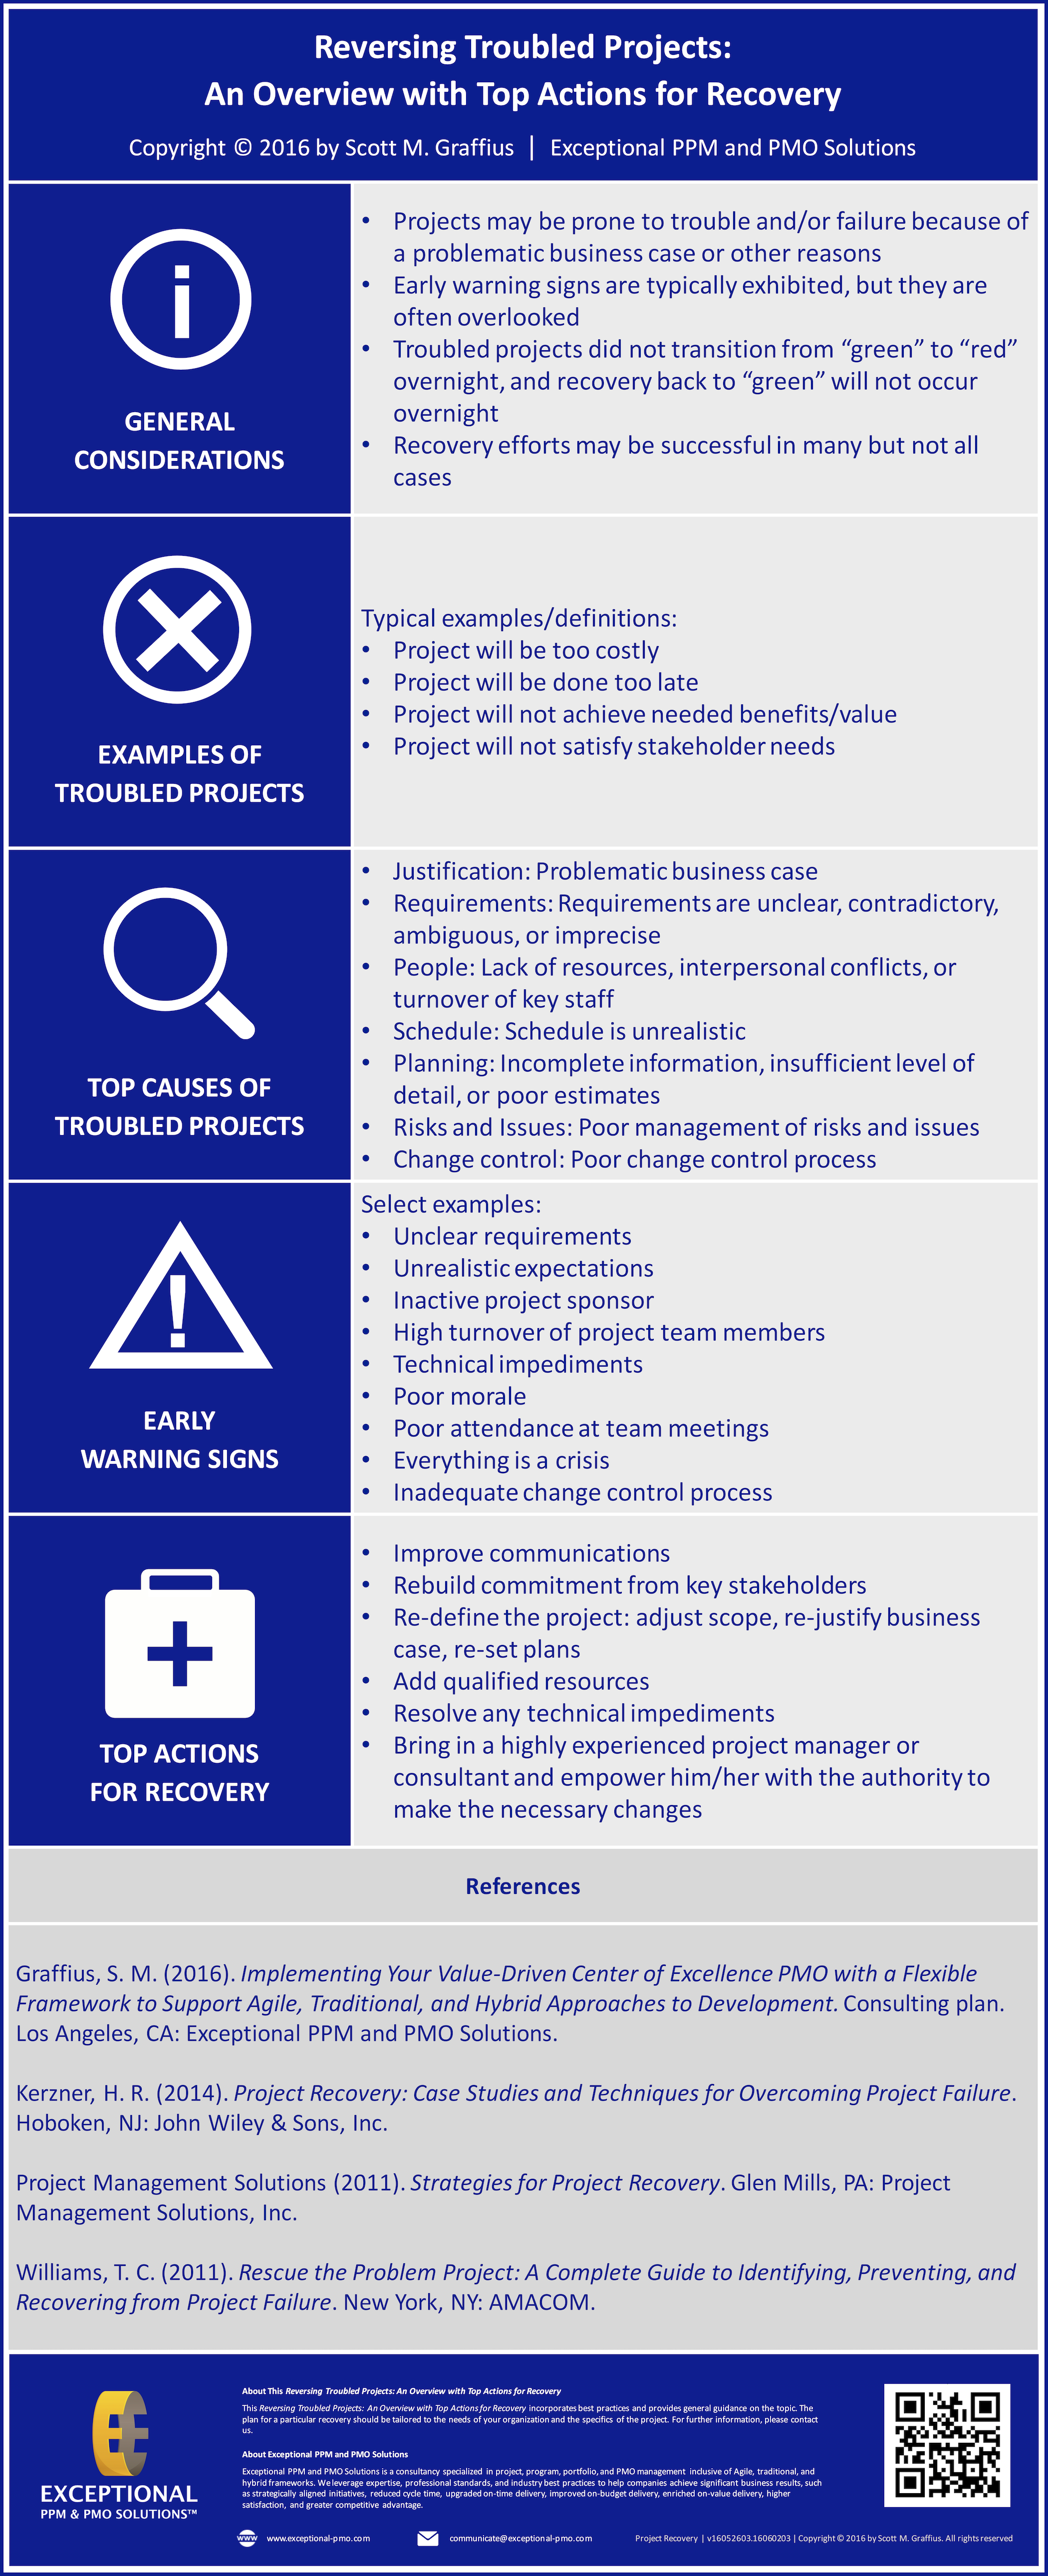  Reversing Troubled Projects: An Overview with Top Actions for Recovery 